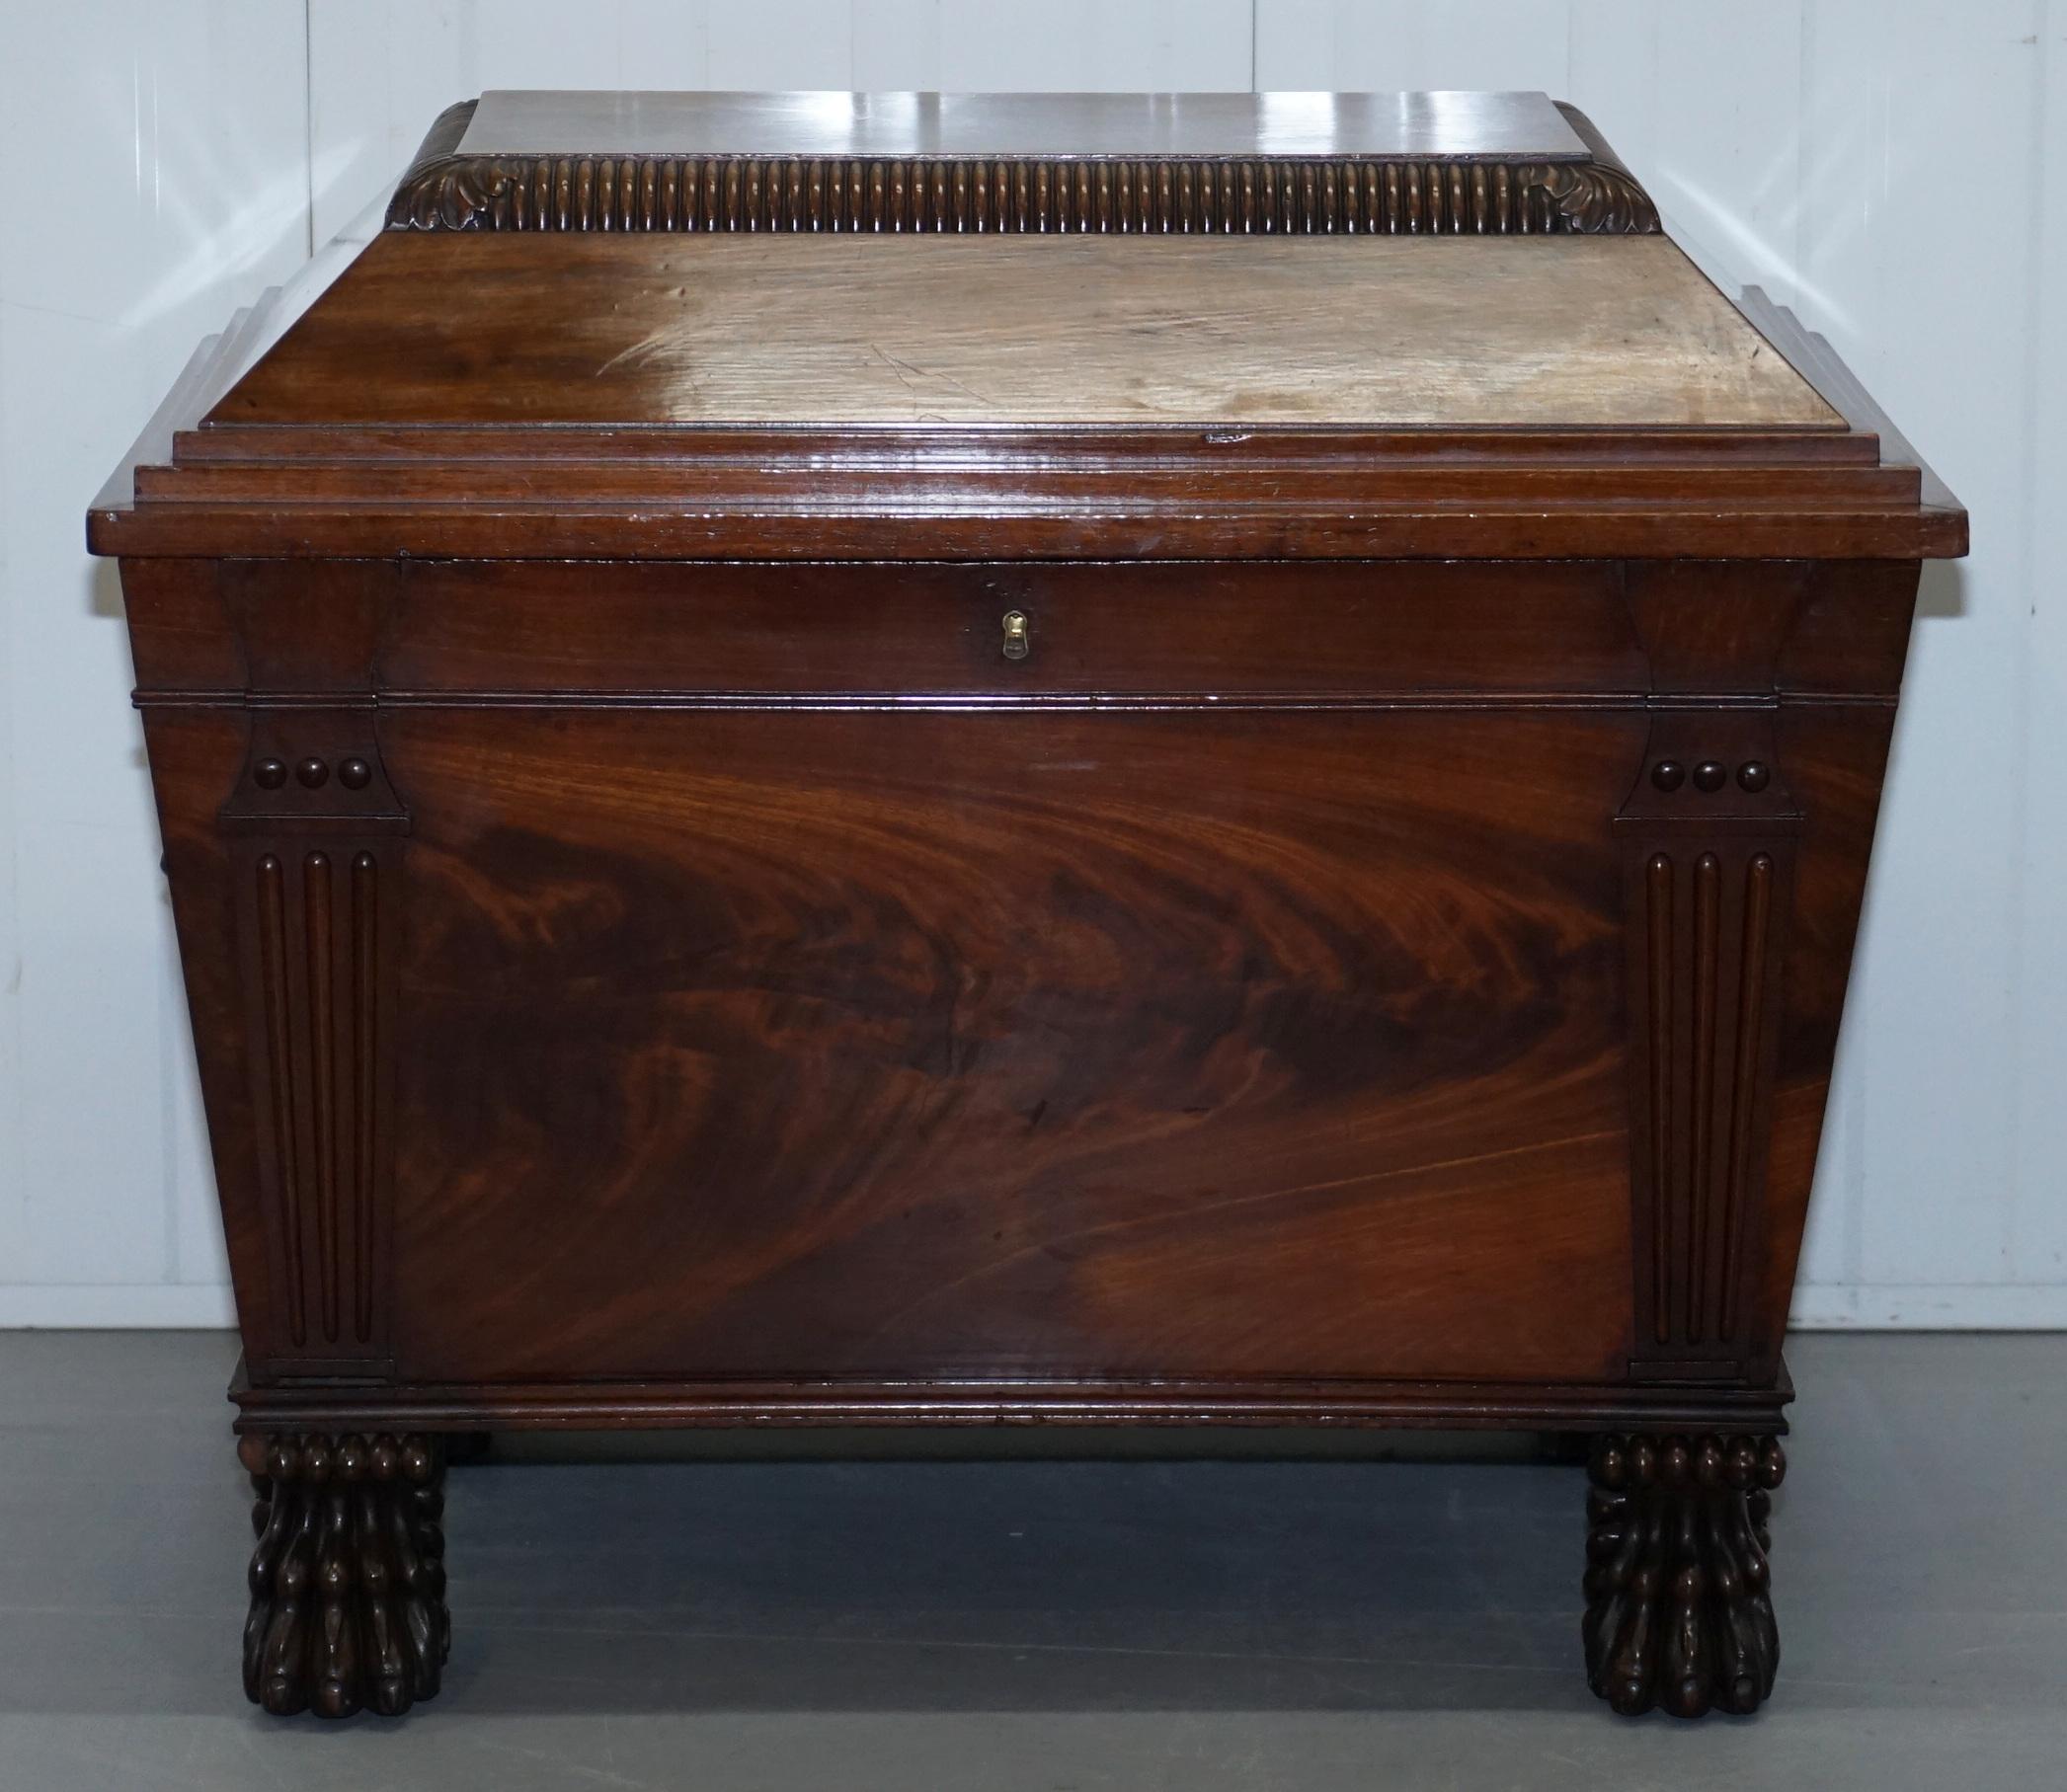 We are delighted to offer for sale this exceptionally rare very large Georgian Irish flamed mahogany wine cooler with Lion head handles circa 1810 owned by Sir Charles Alexander Anderson lieutenant general for the British Army.

This piece is